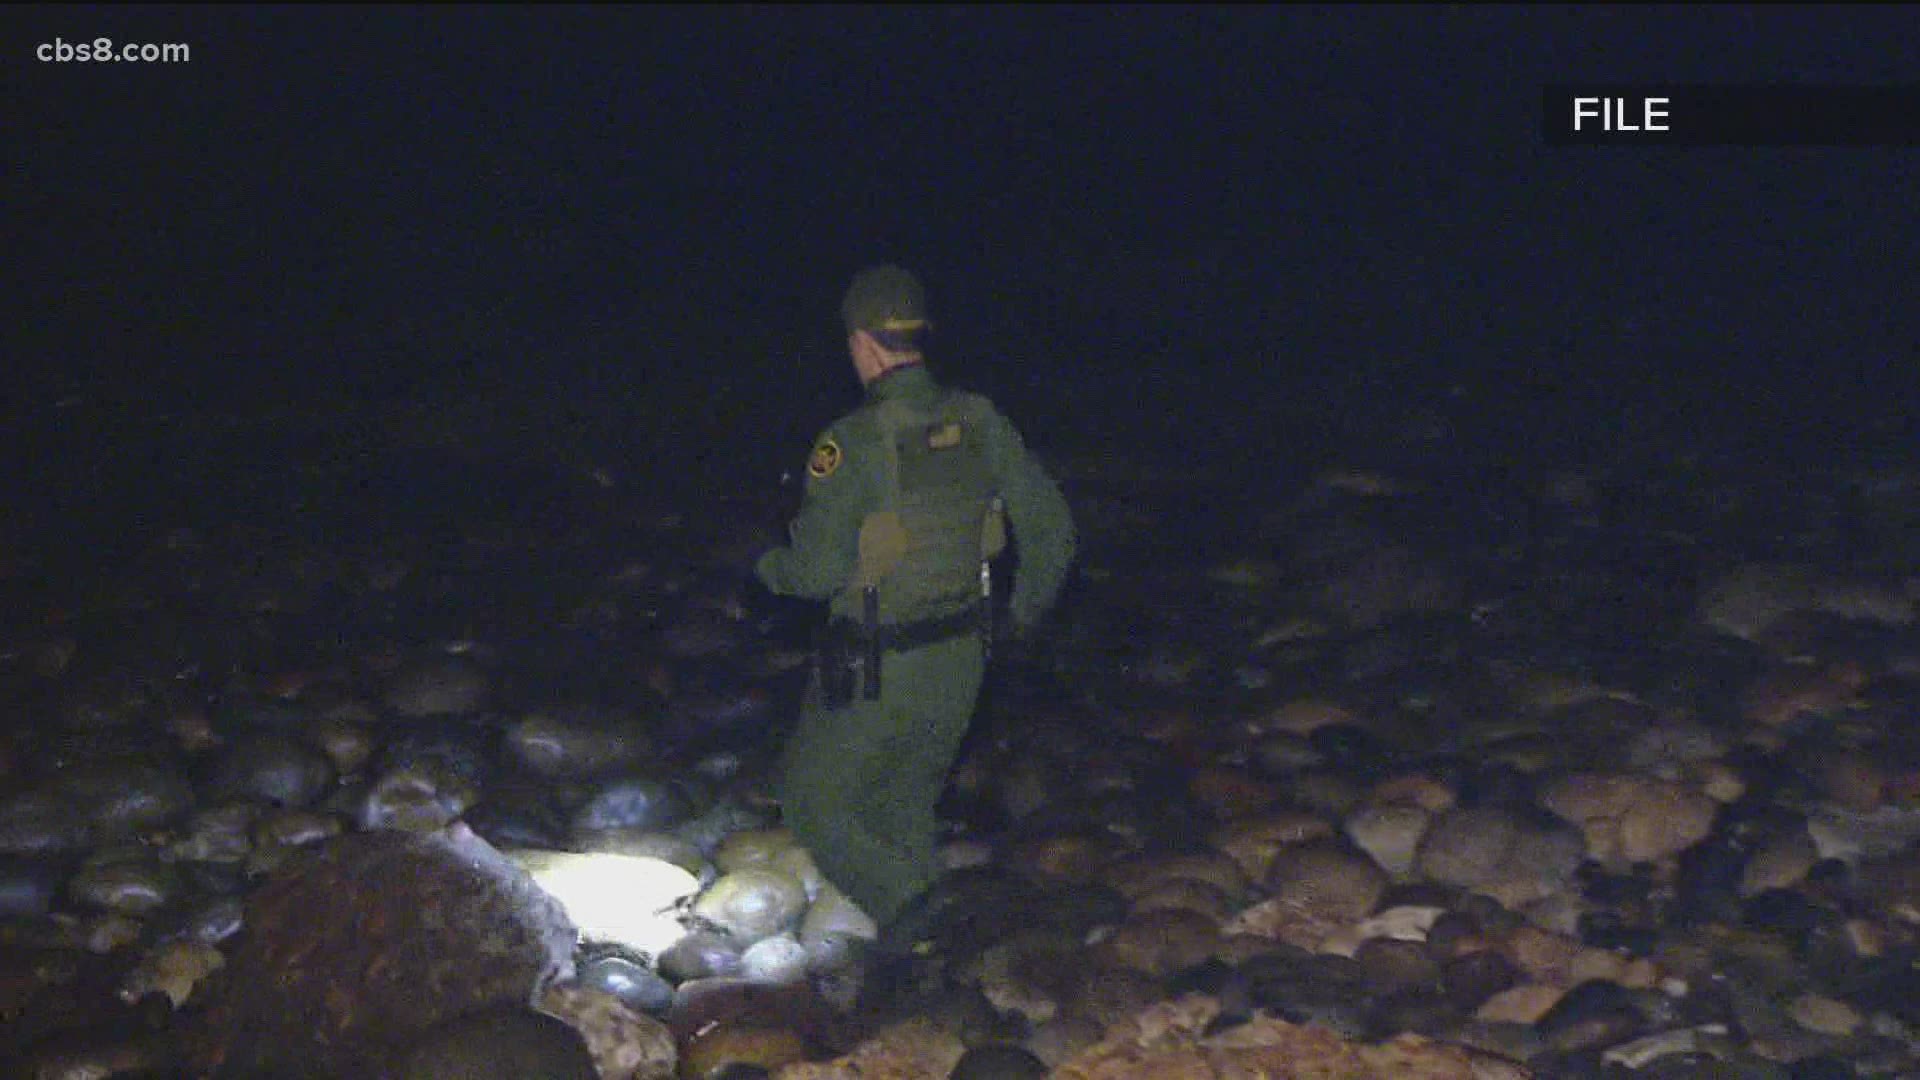 The U.S. Border Patrol said they do not enter the water to detain migrants.